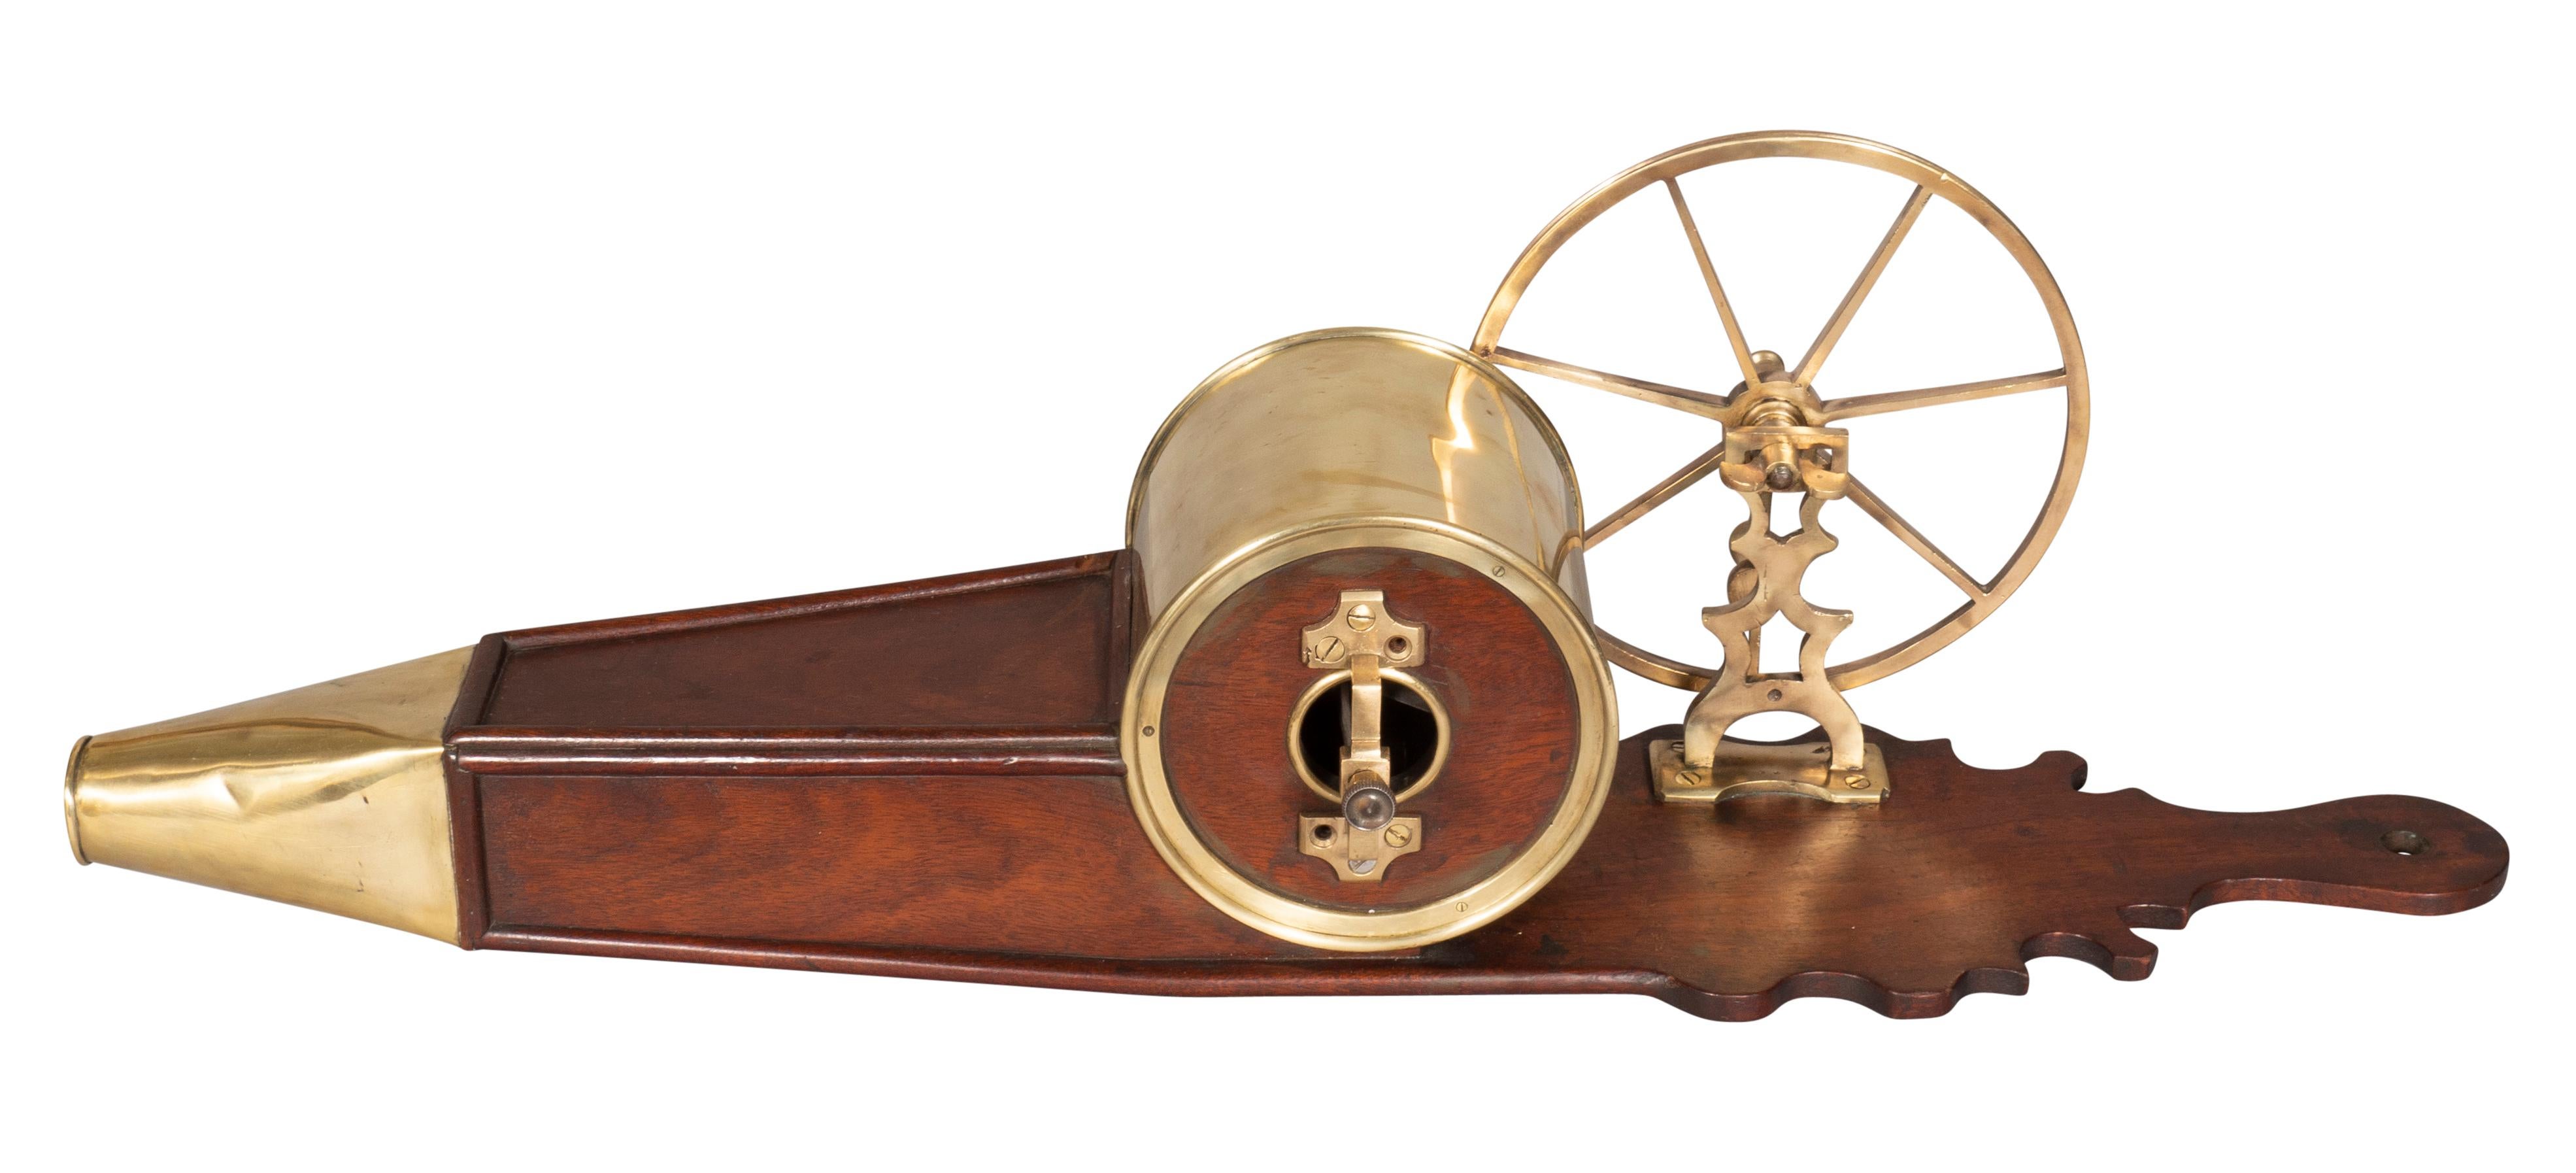 With a cutout for hanging on a wall. Brass spoked wheel with handle that turns to blow air on a fire. Polished.